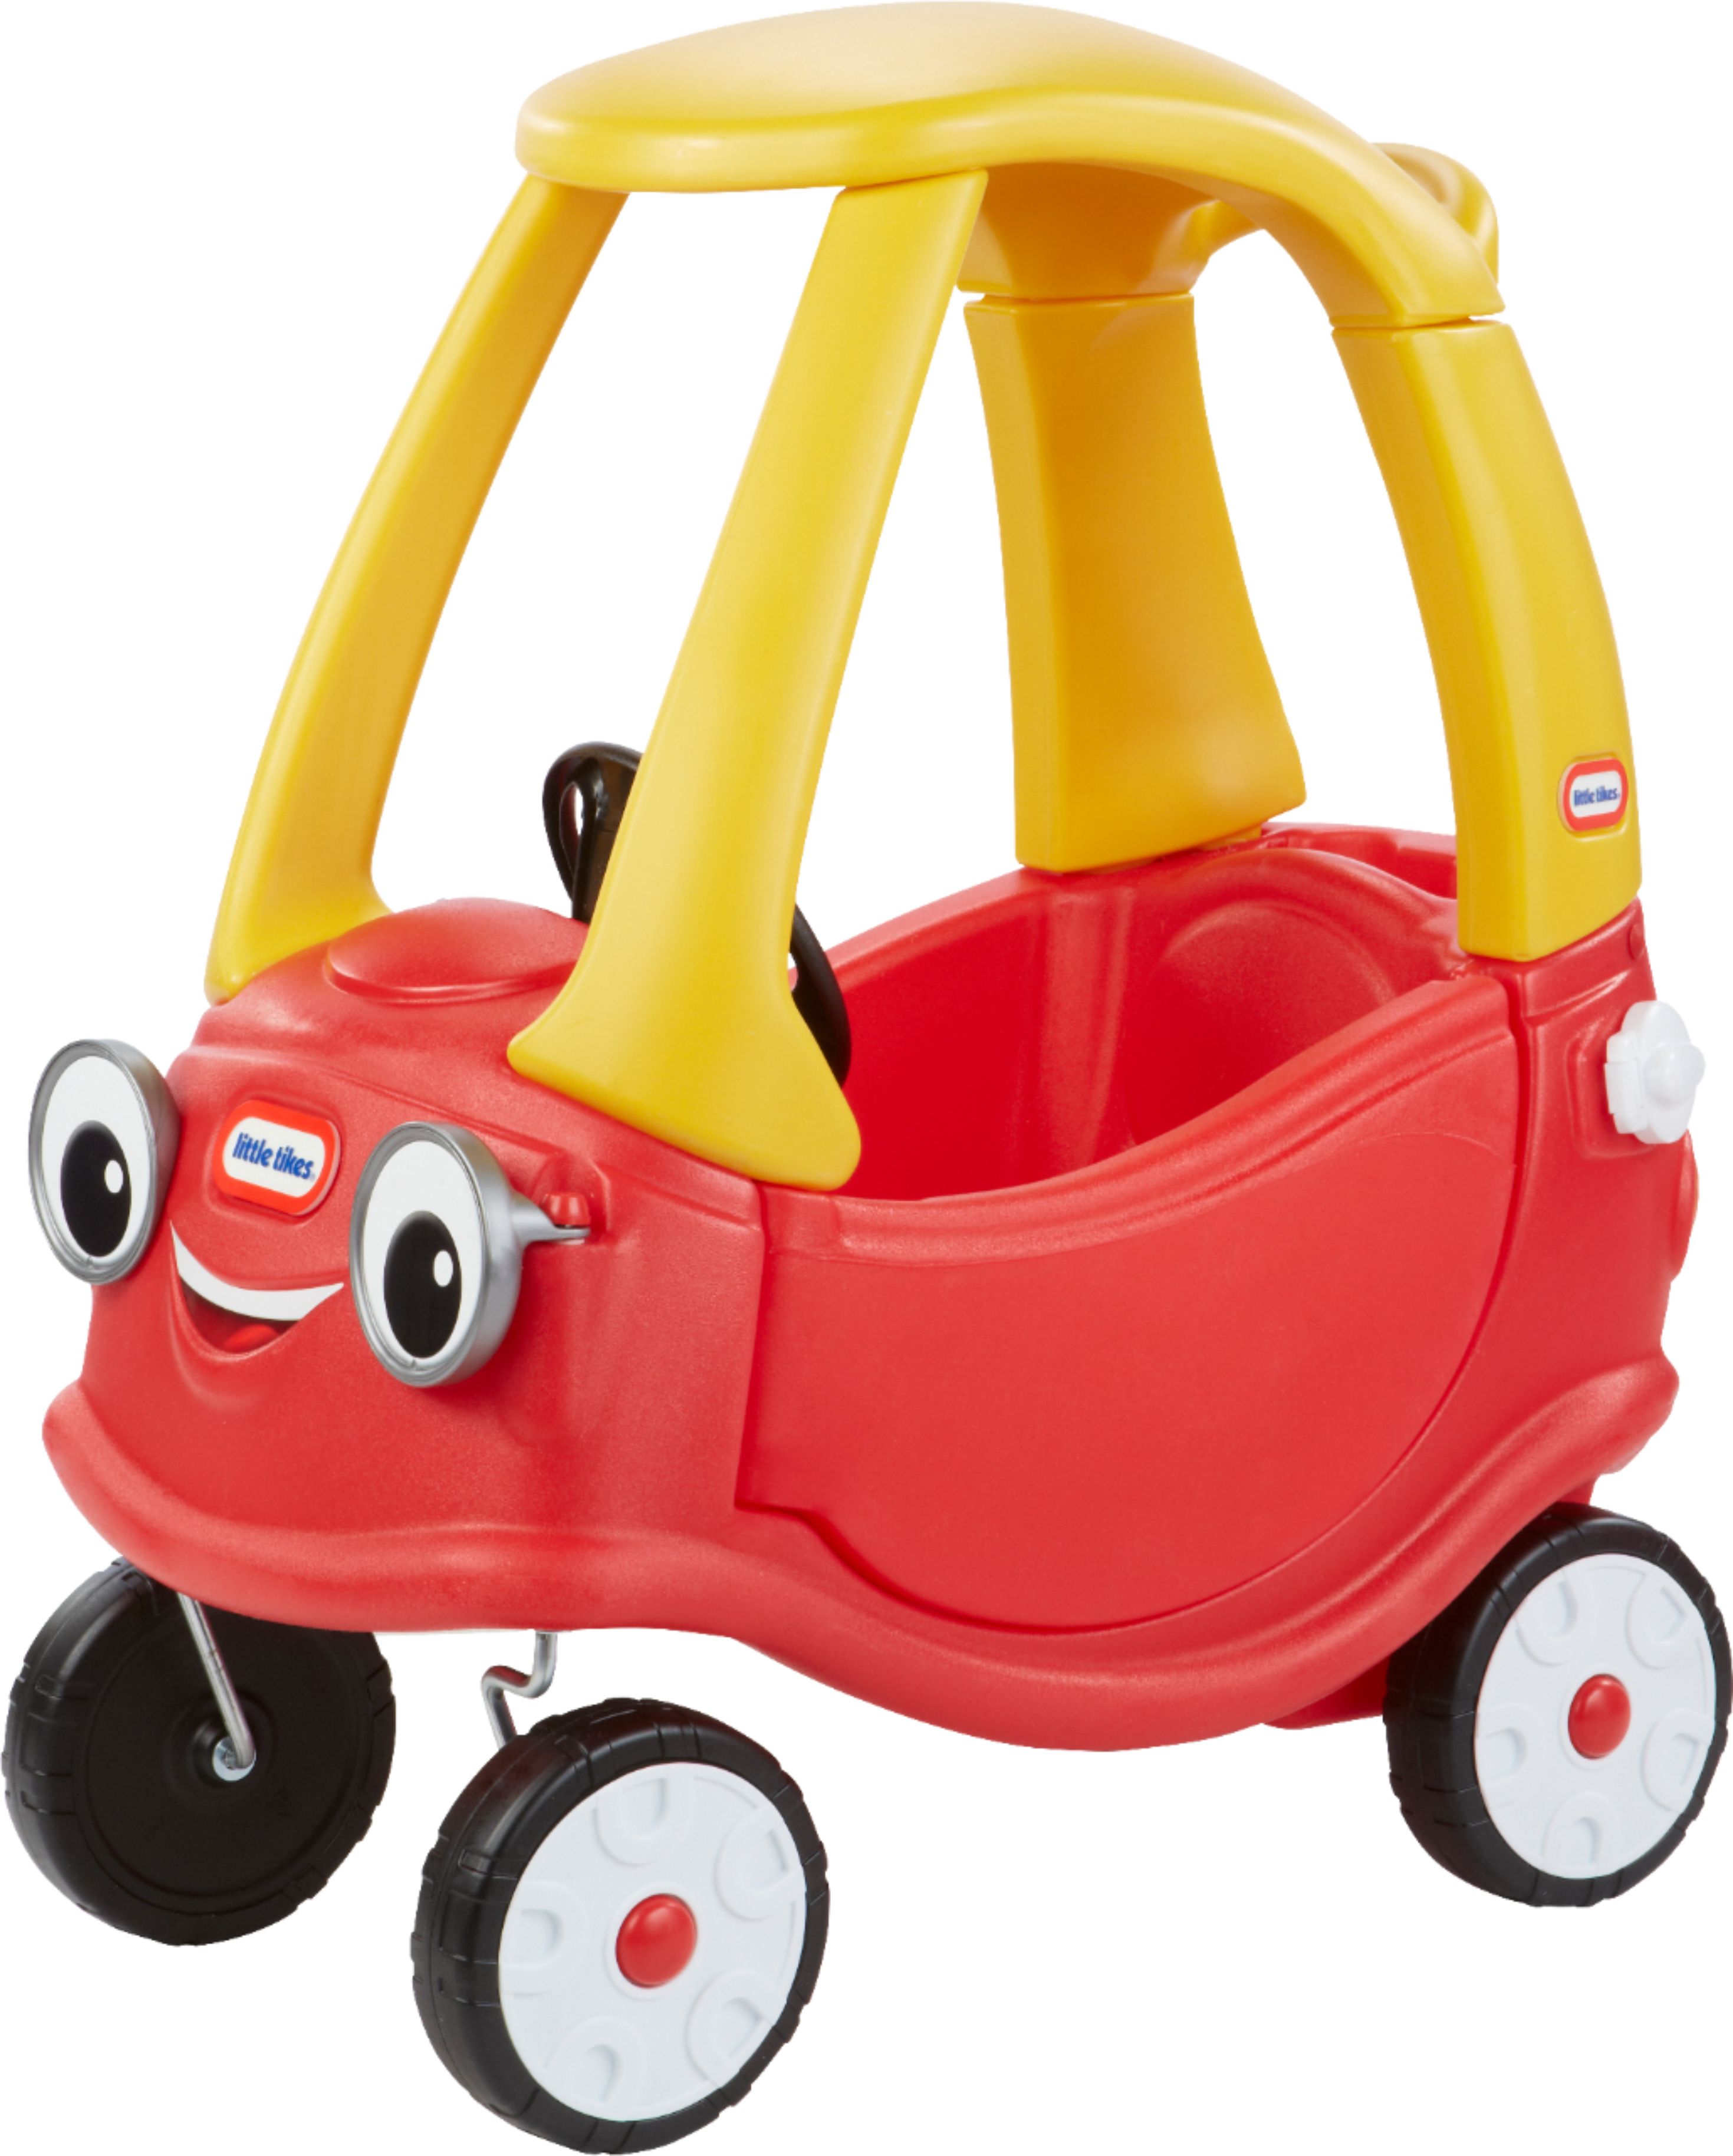 Customer Reviews: Little Tikes Cozy Coupe Yellow and Red 642302MP ...